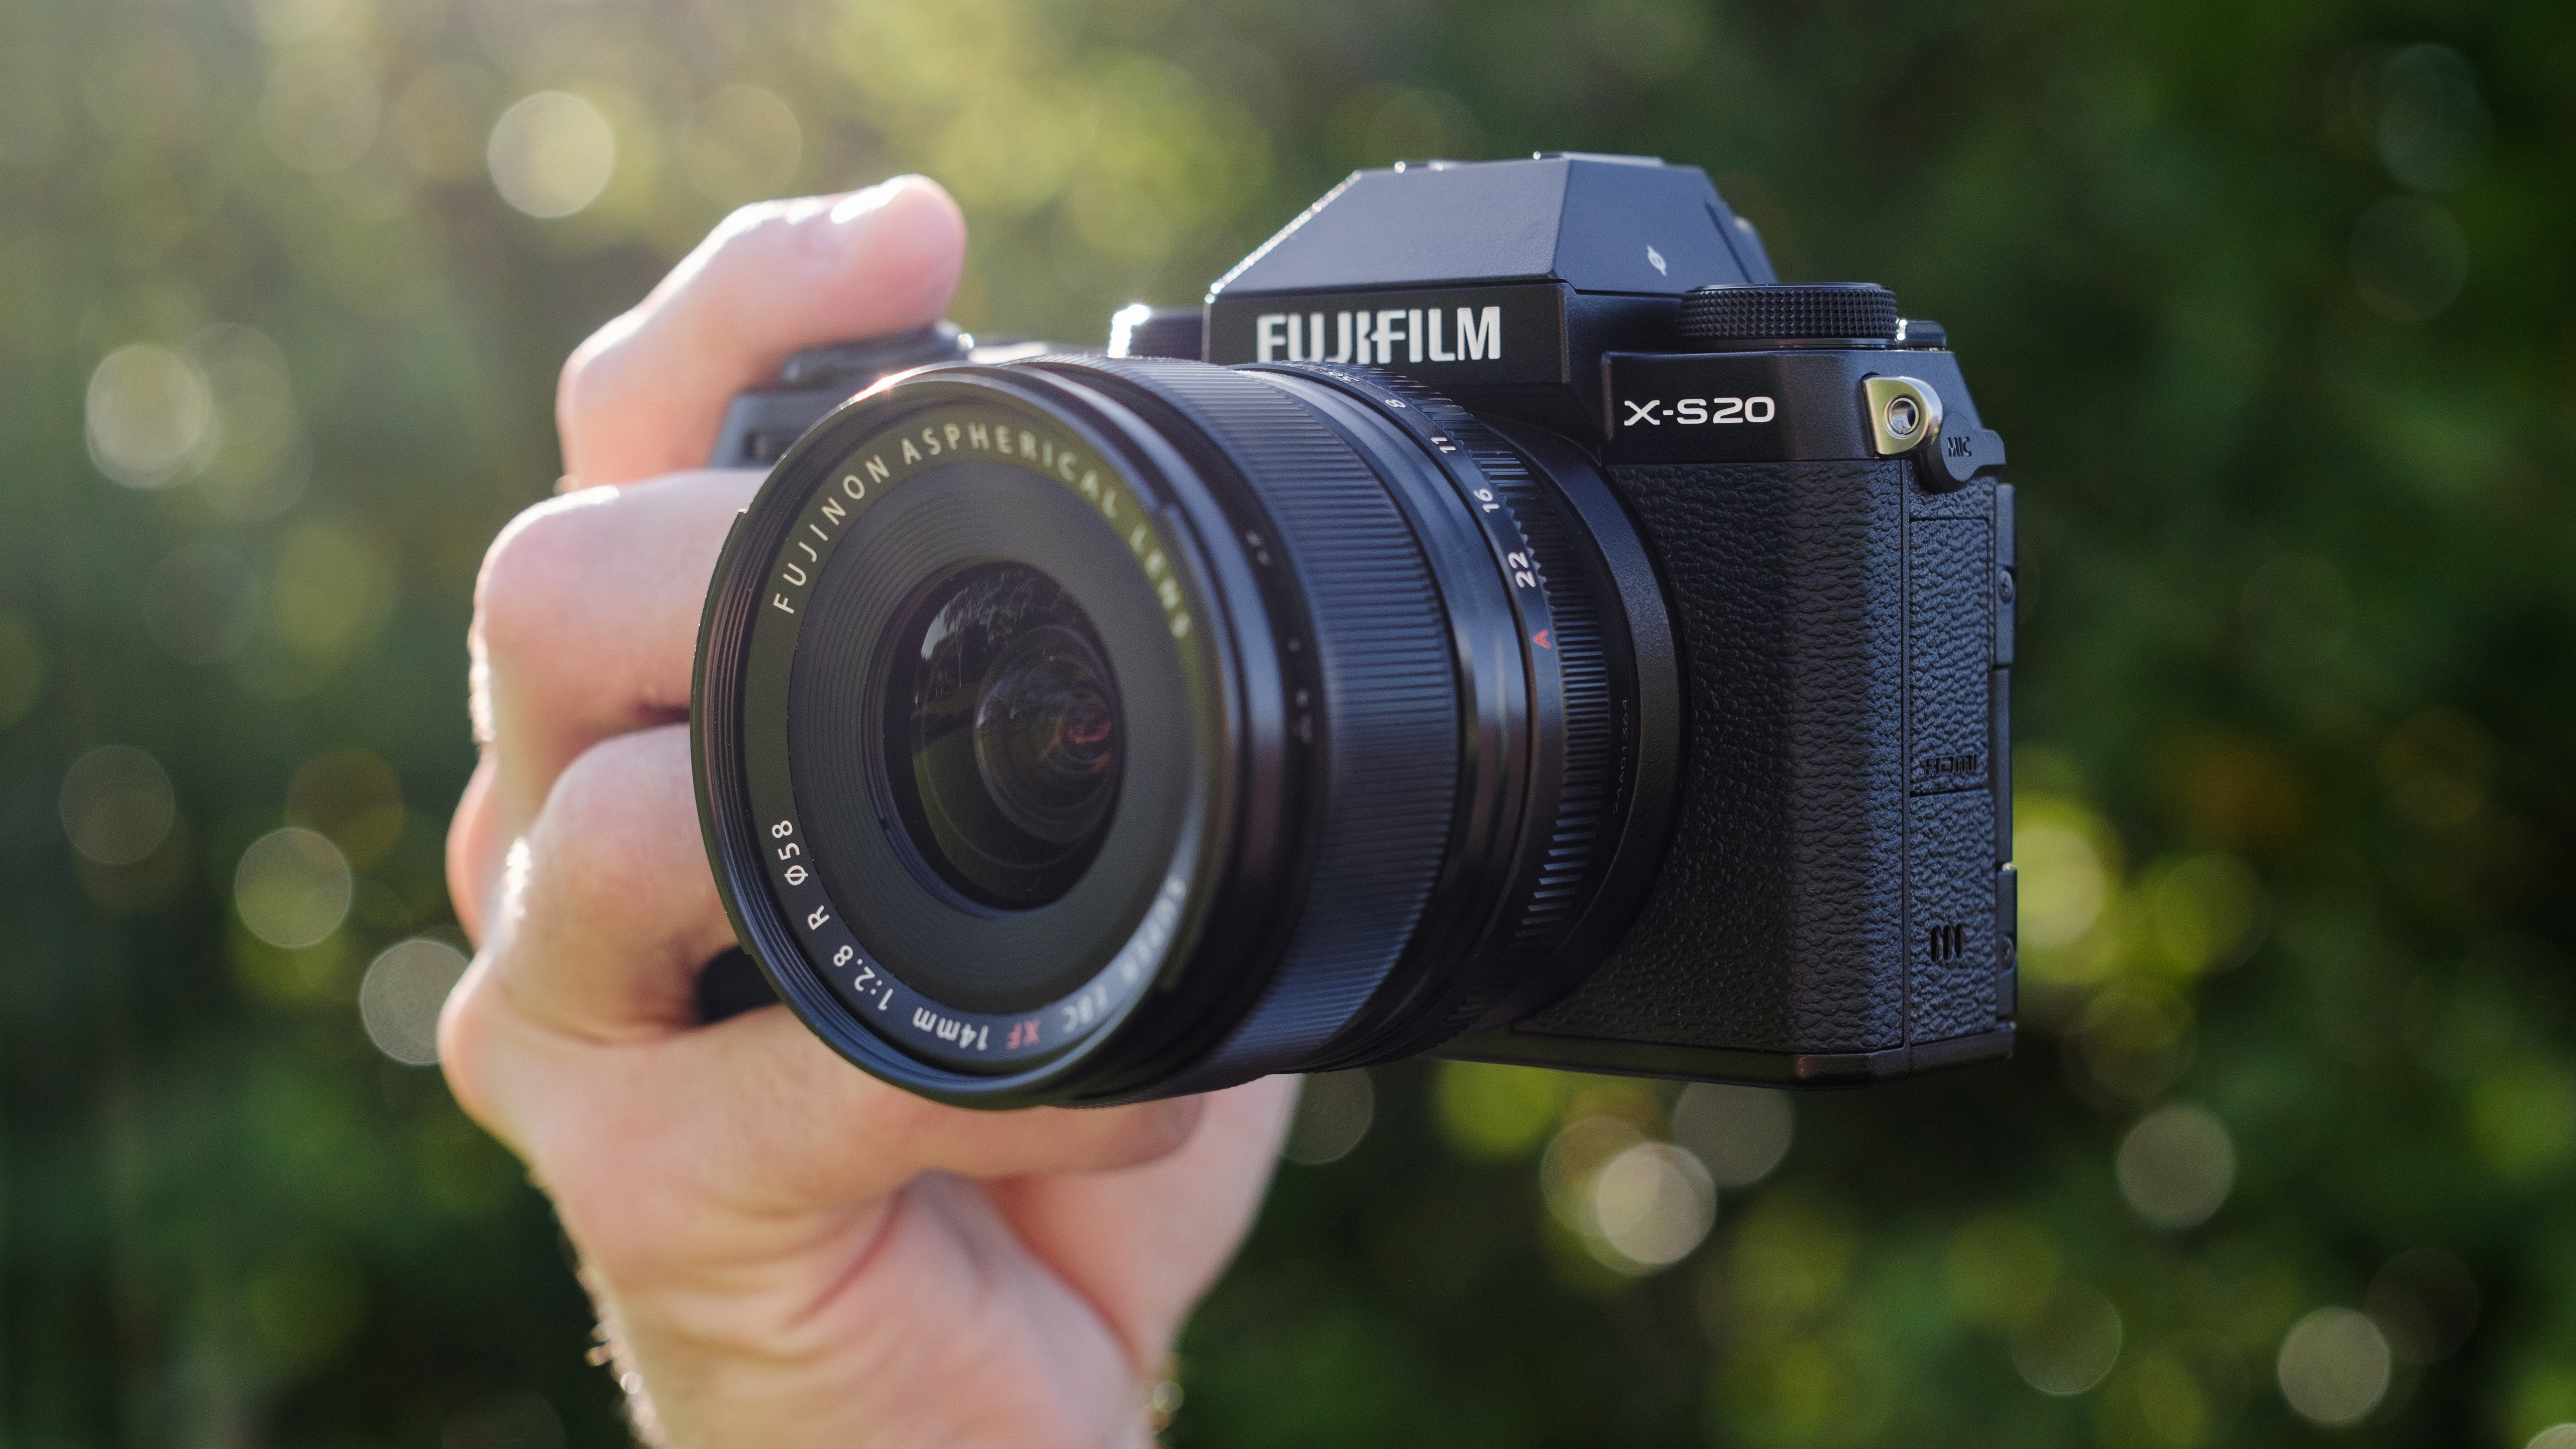 Fujifilm launches X-S20 mirrorless APS-C camera with 6K video, Vlog mode  aimed at travel photography and videography -  News